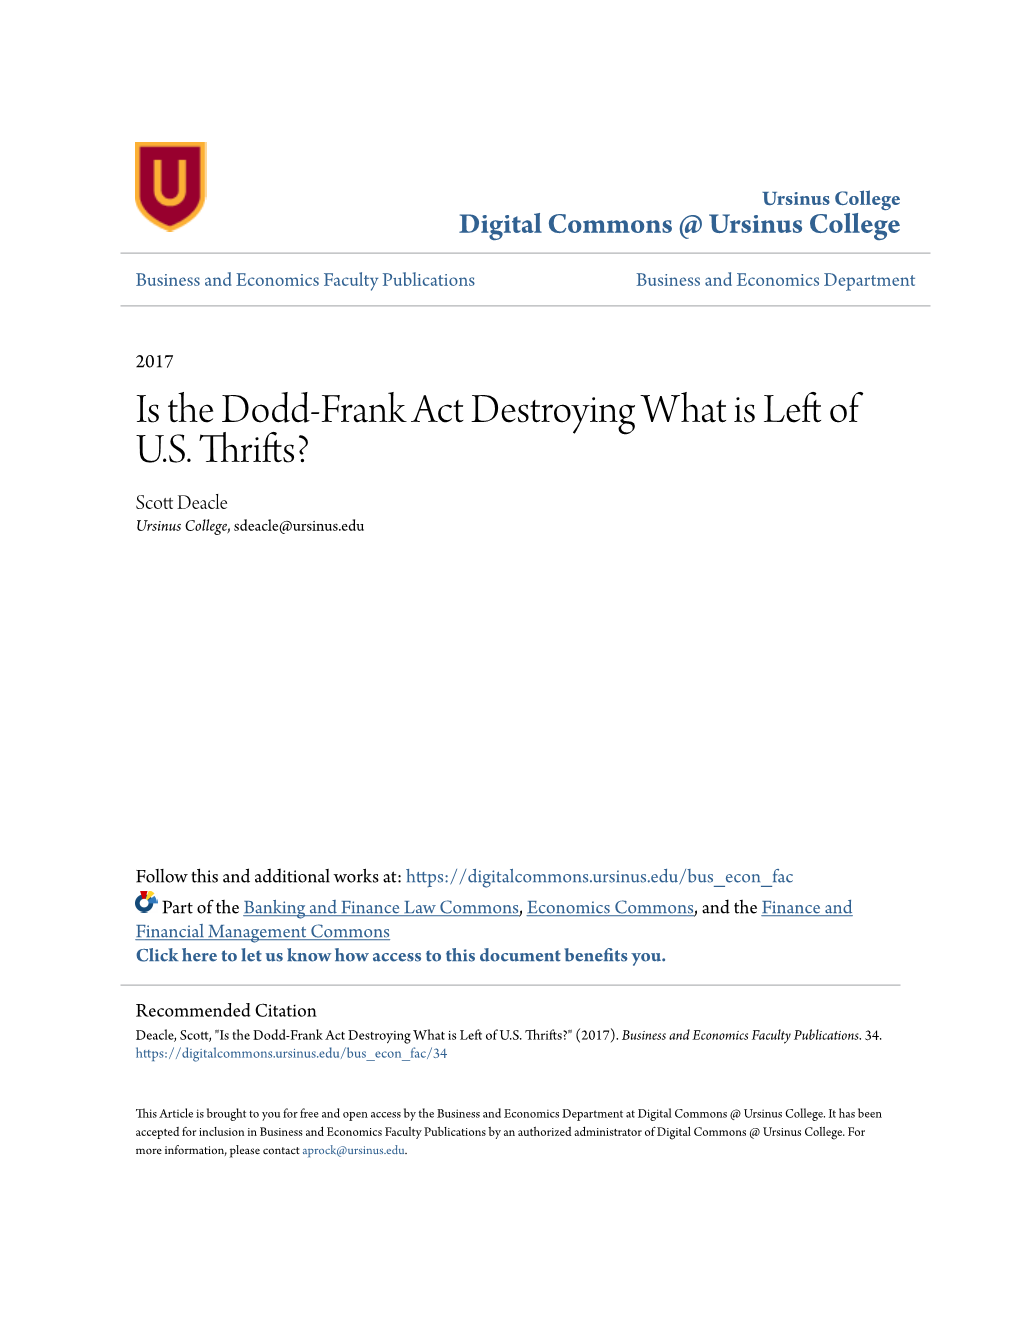 Is the Dodd-Frank Act Destroying What Is Left of U.S. Thrifts? Scott Ed Acle Ursinus College, Sdeacle@Ursinus.Edu